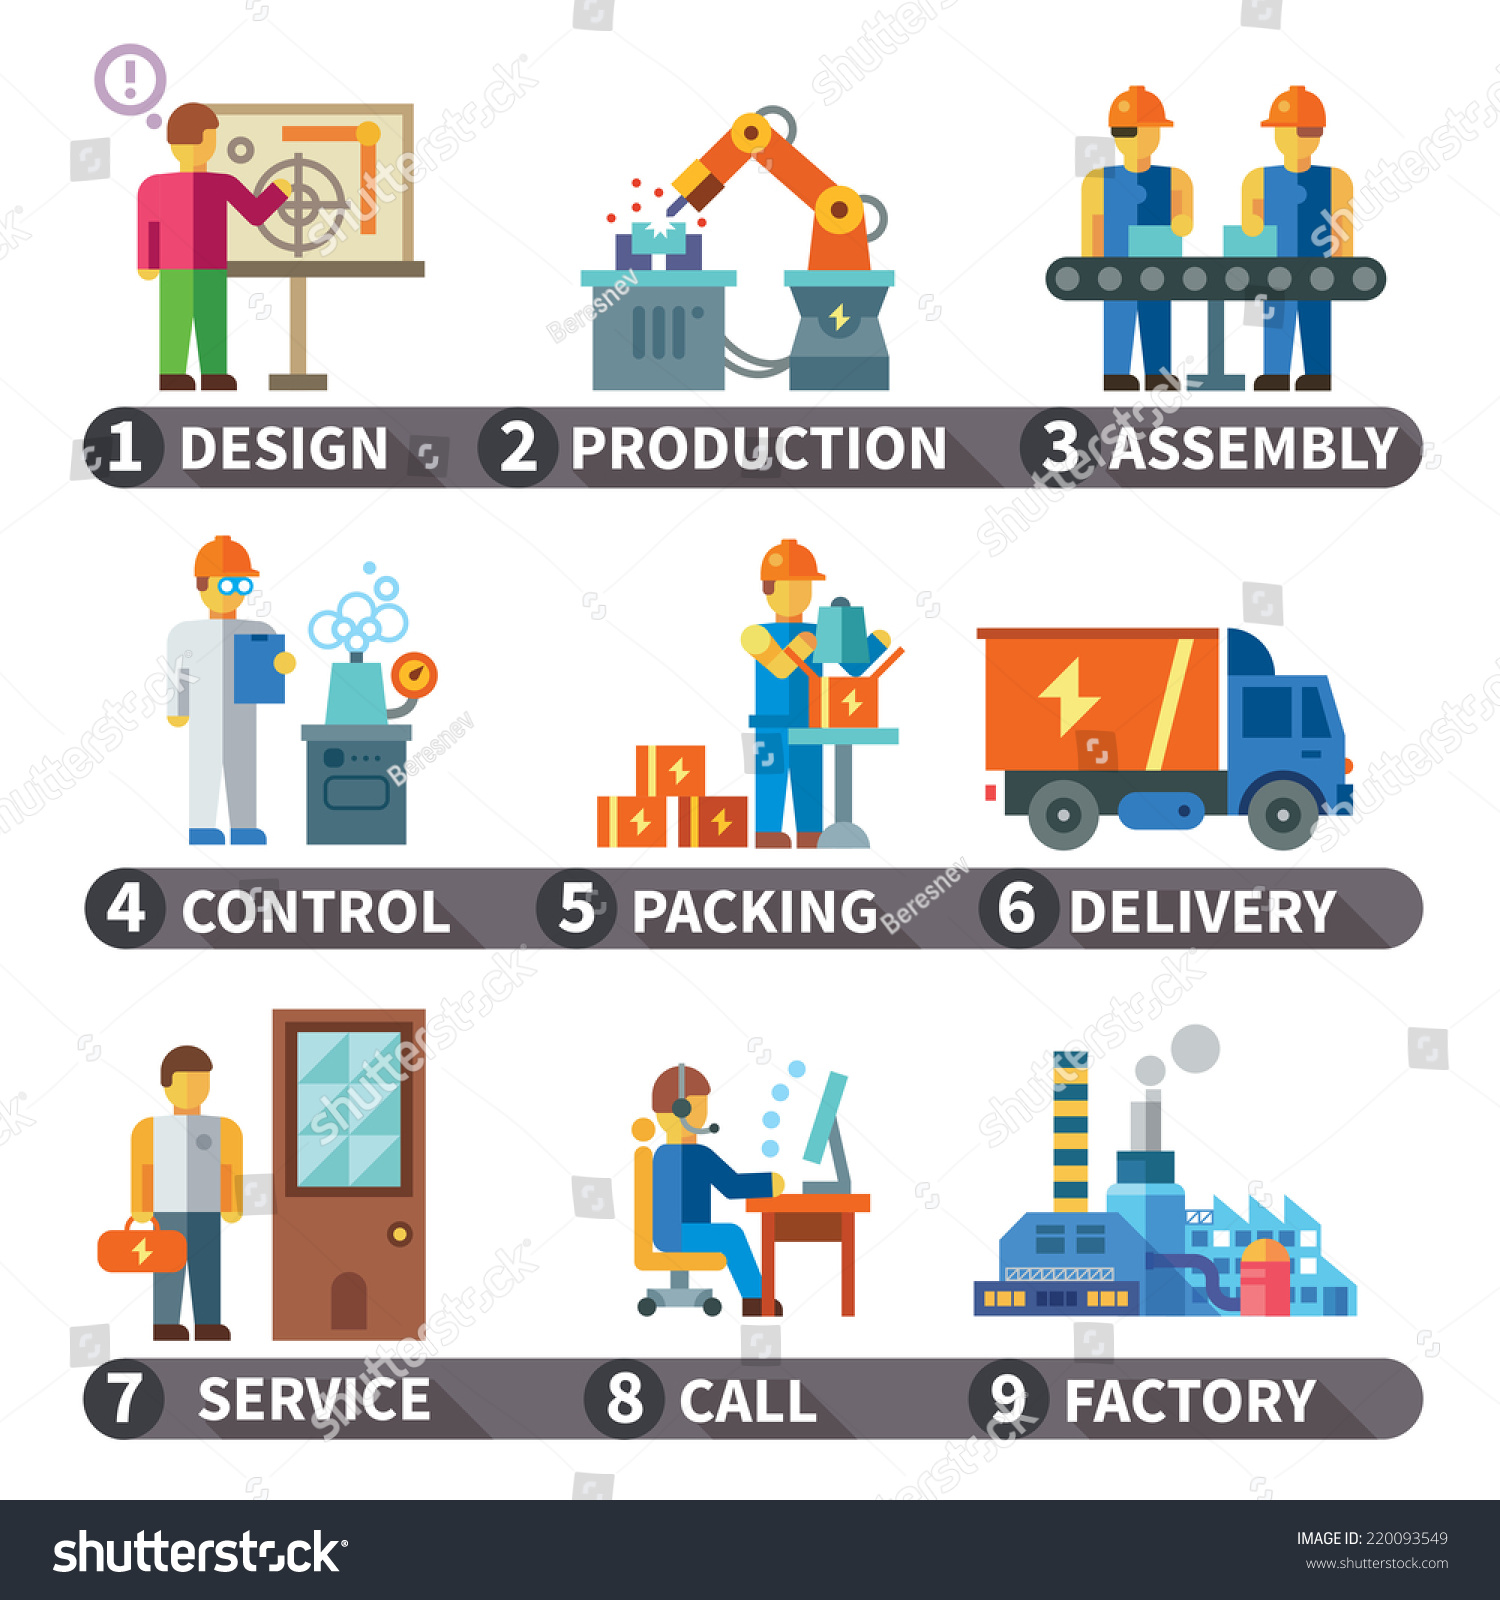 Color Flat Illustrations Info Graphic Factory Stock Illustration 220093549